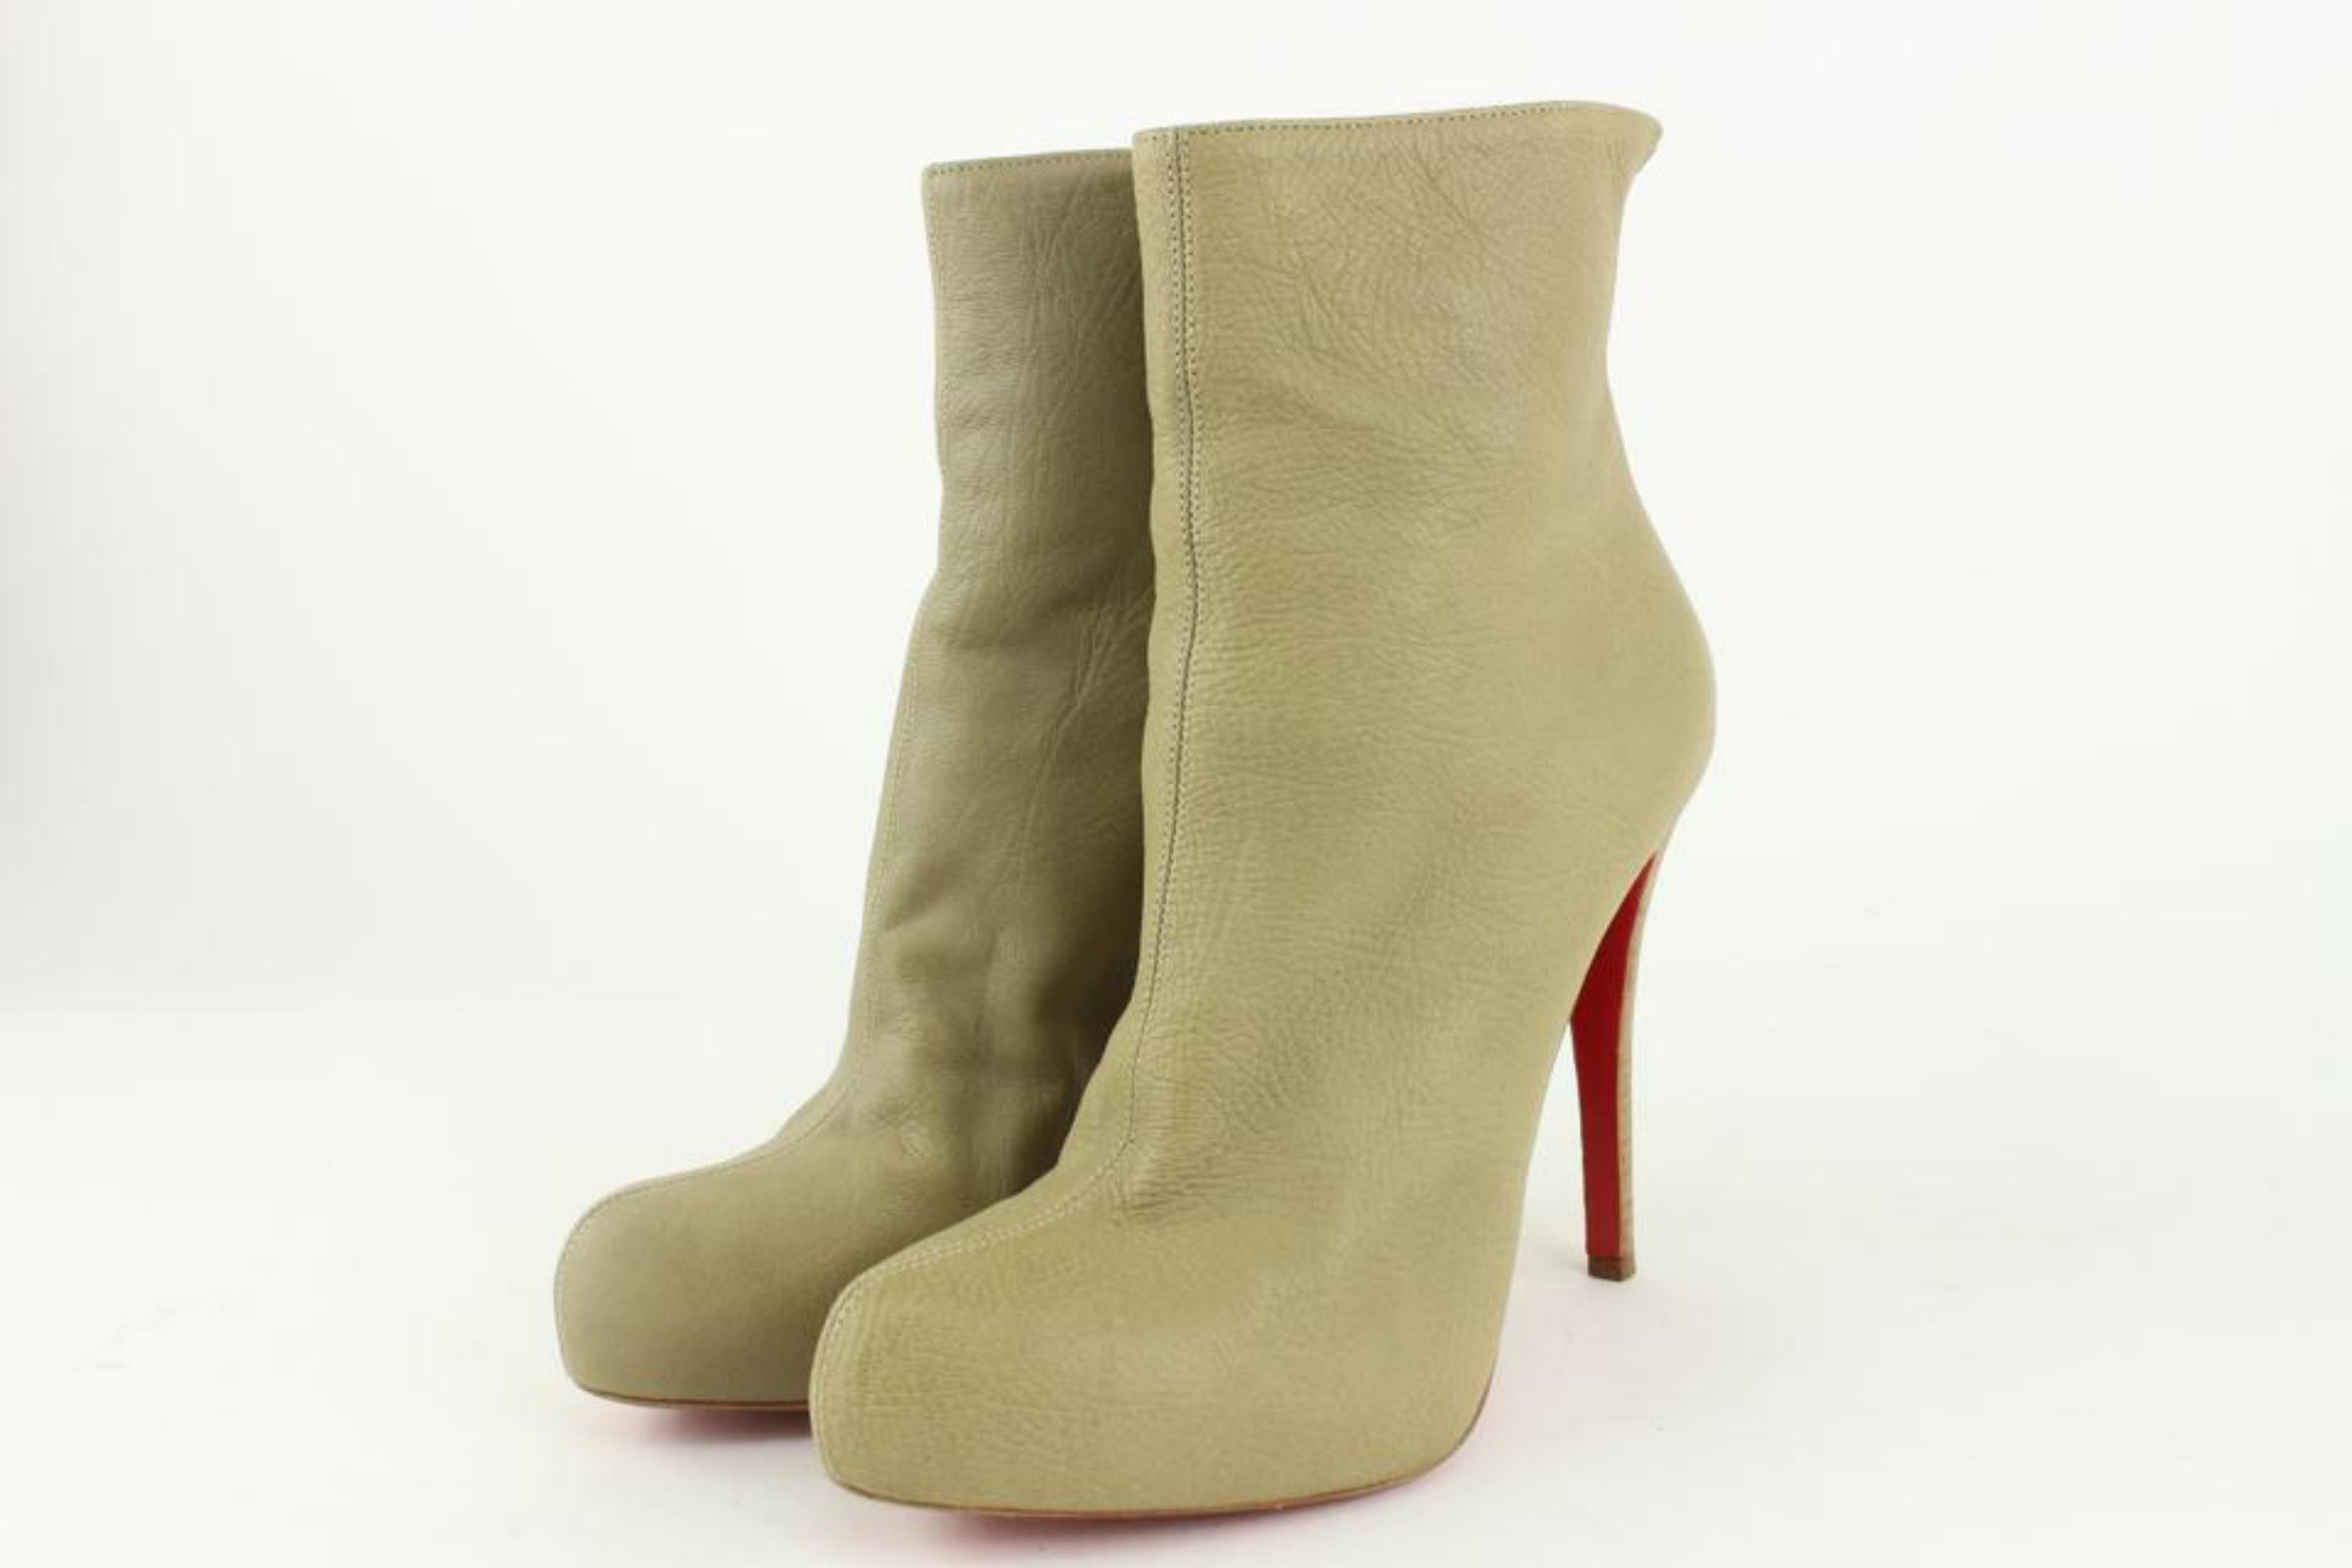 Christian Louboutin Women's 39.5 Taupe Ankle Booty Rear Zip Booties 5cl1112
Made In: Italy
Measurements: Length: 8 